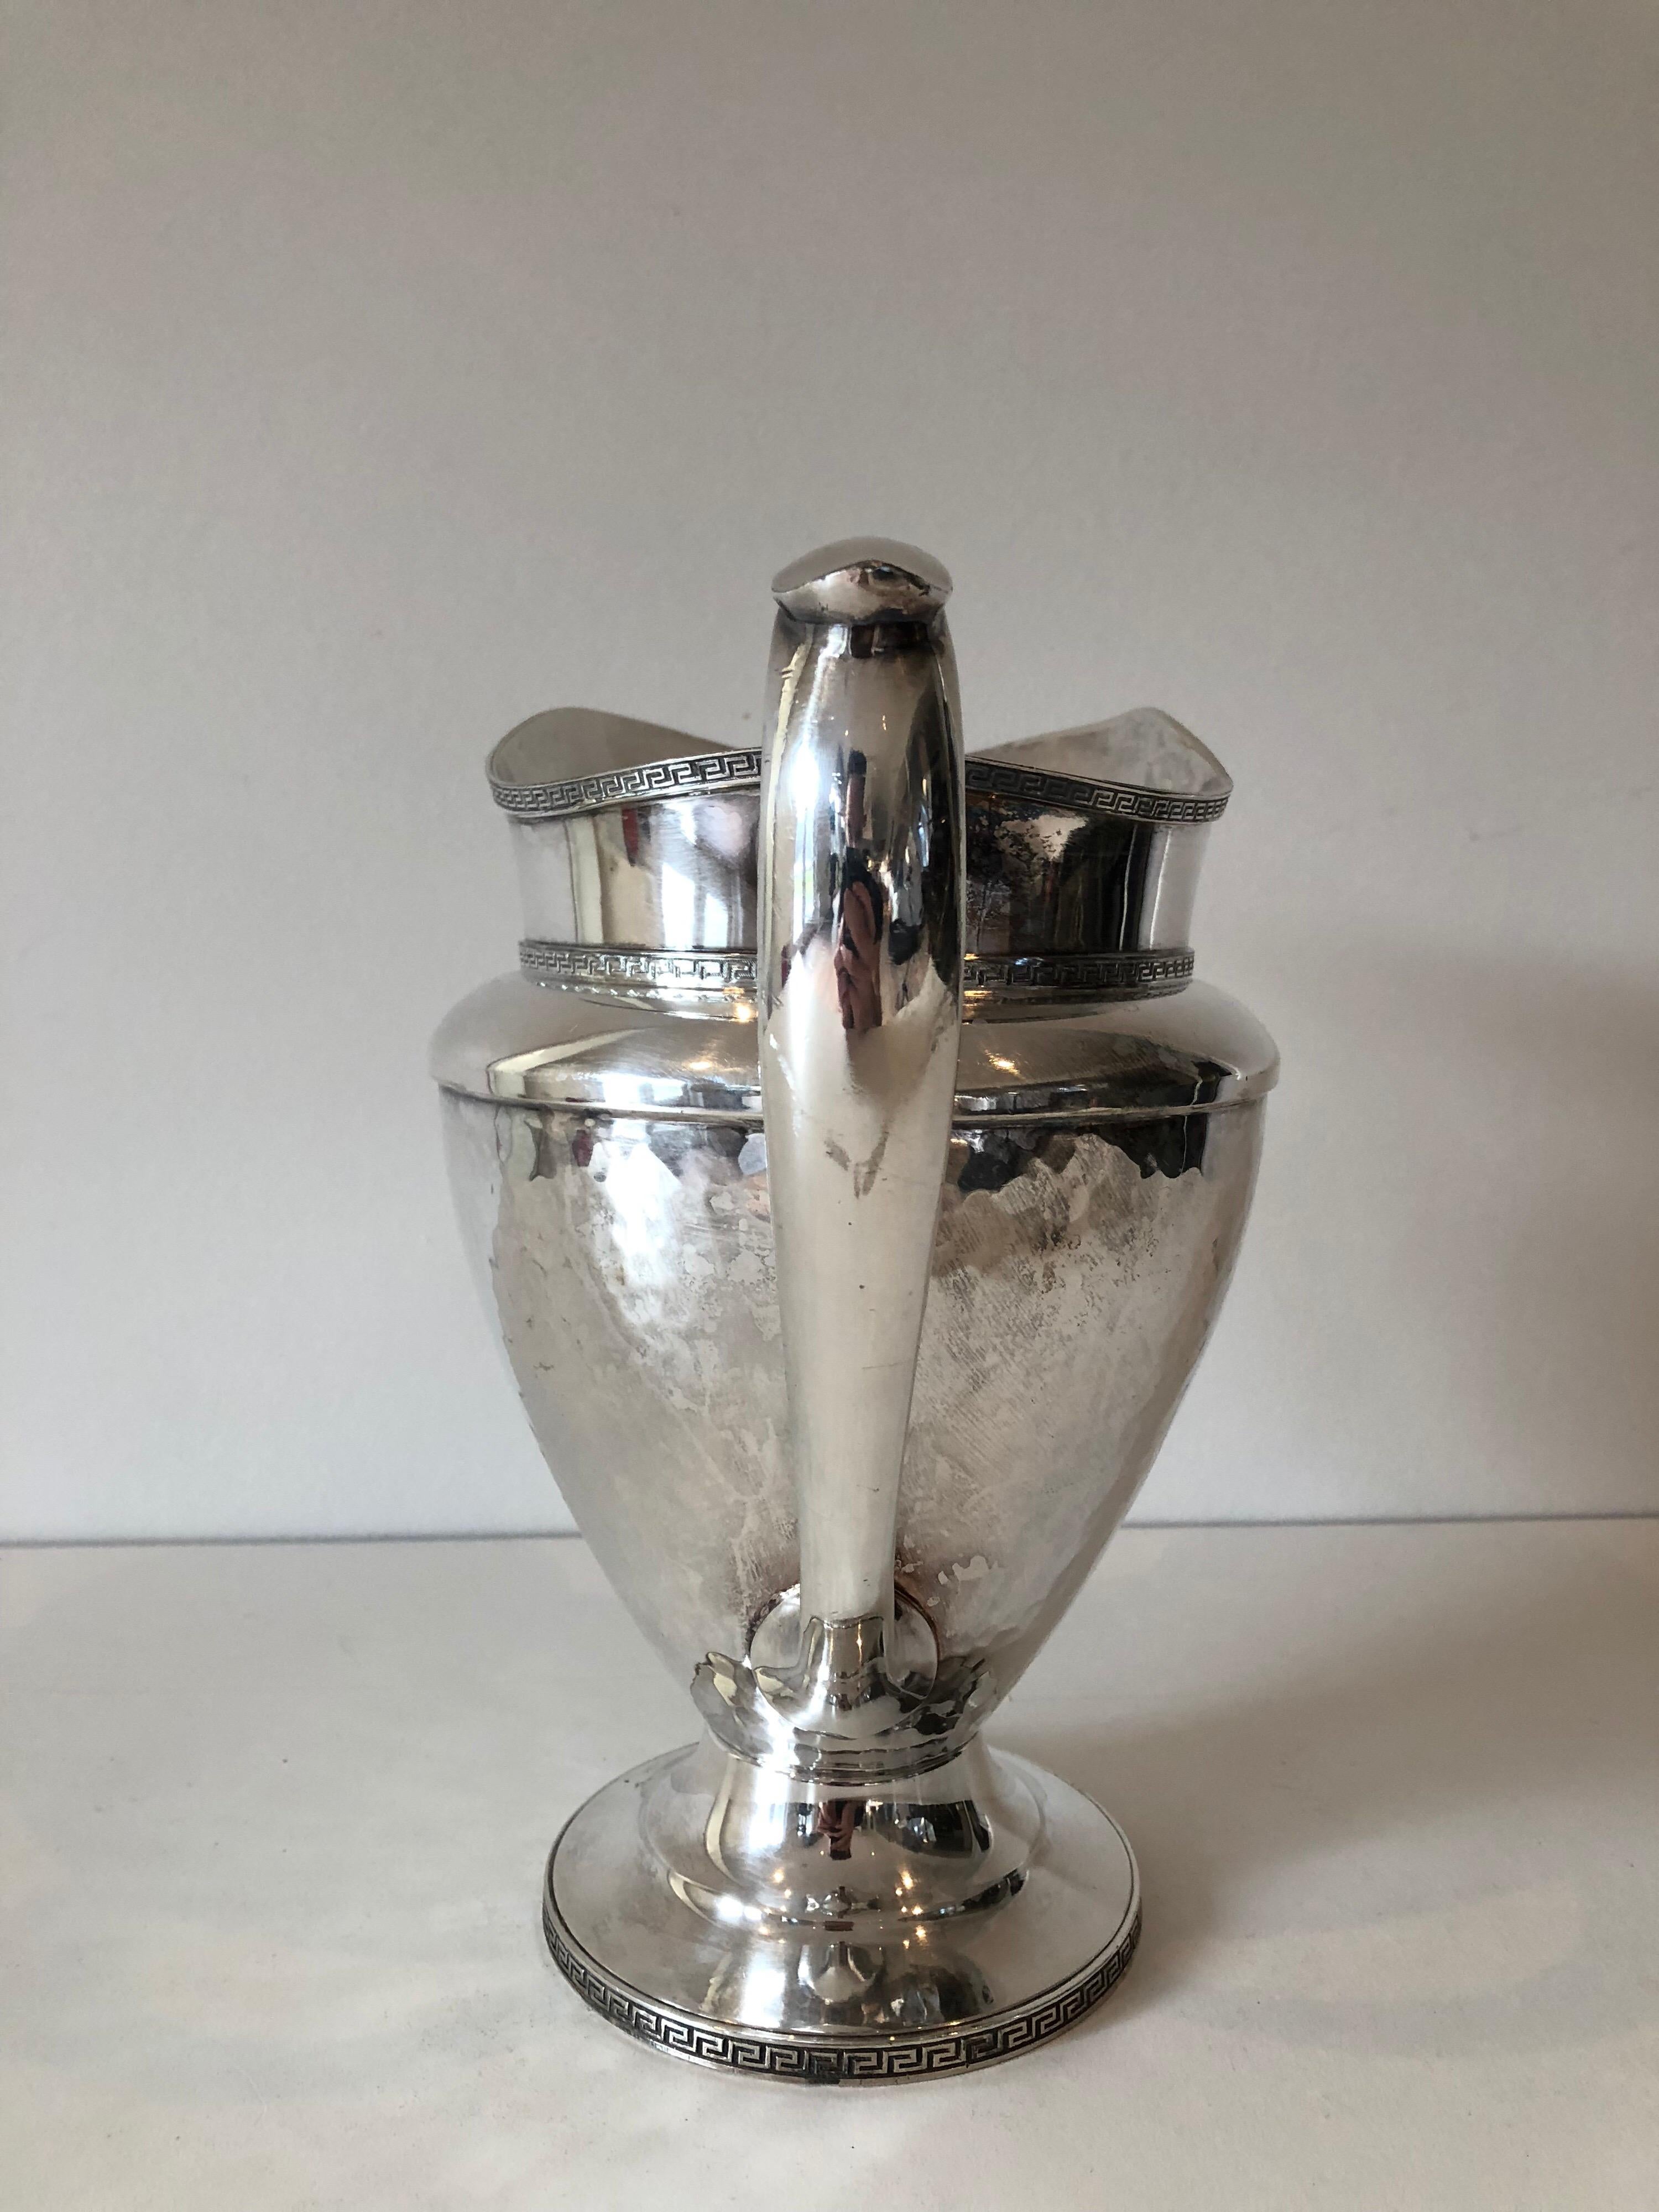 A vintage silver plated nickel pitcher with Greek key design throughout.